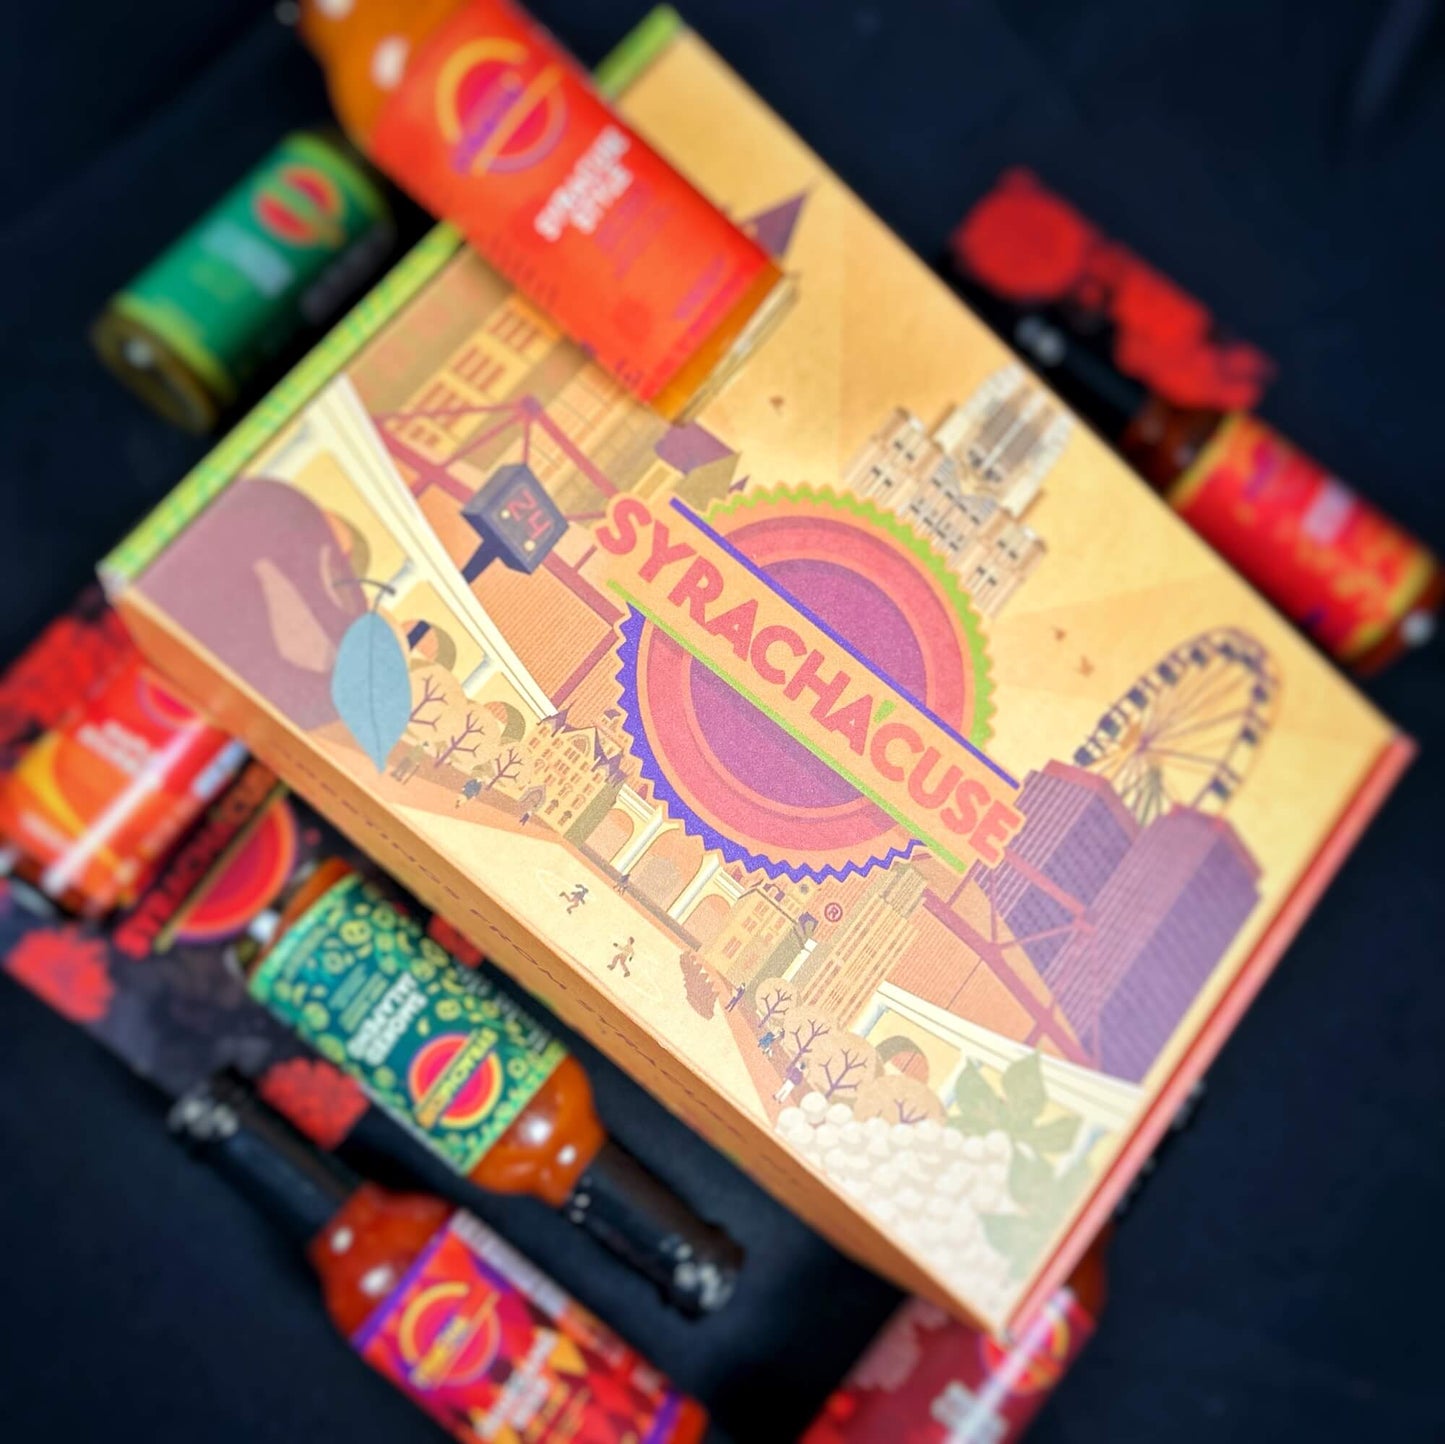 Build Your Own Collector's Edition 4 and 5-pack Hot Sauce Gift Set (Price Varies)